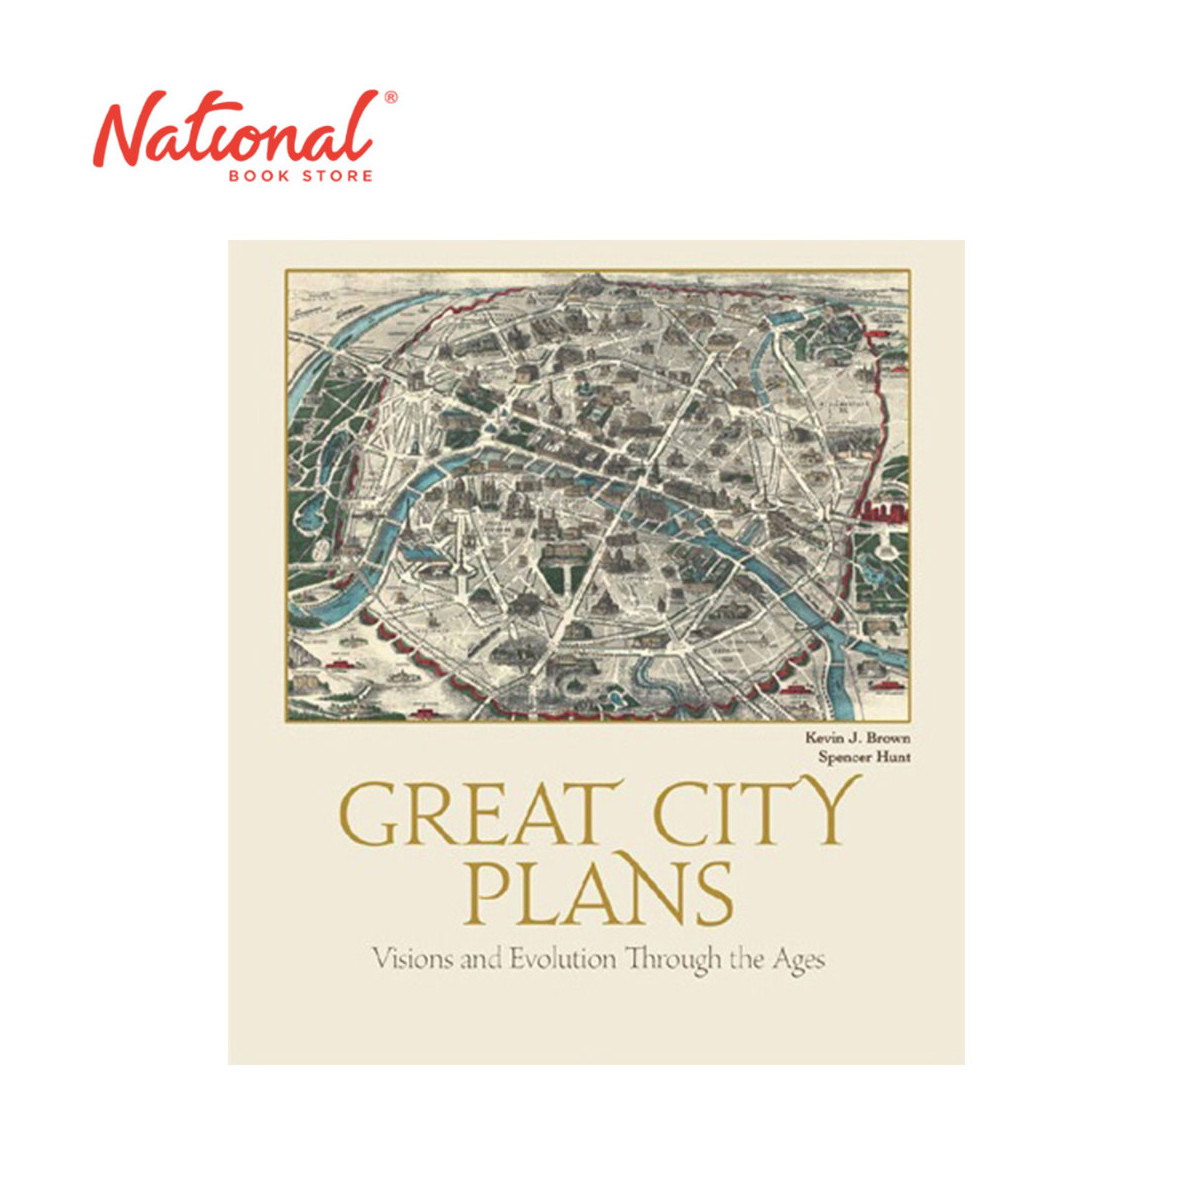 Great City Plans: Visions and Evolution Through the Ages by Kevin J. Brown and Spencer D. Hunt